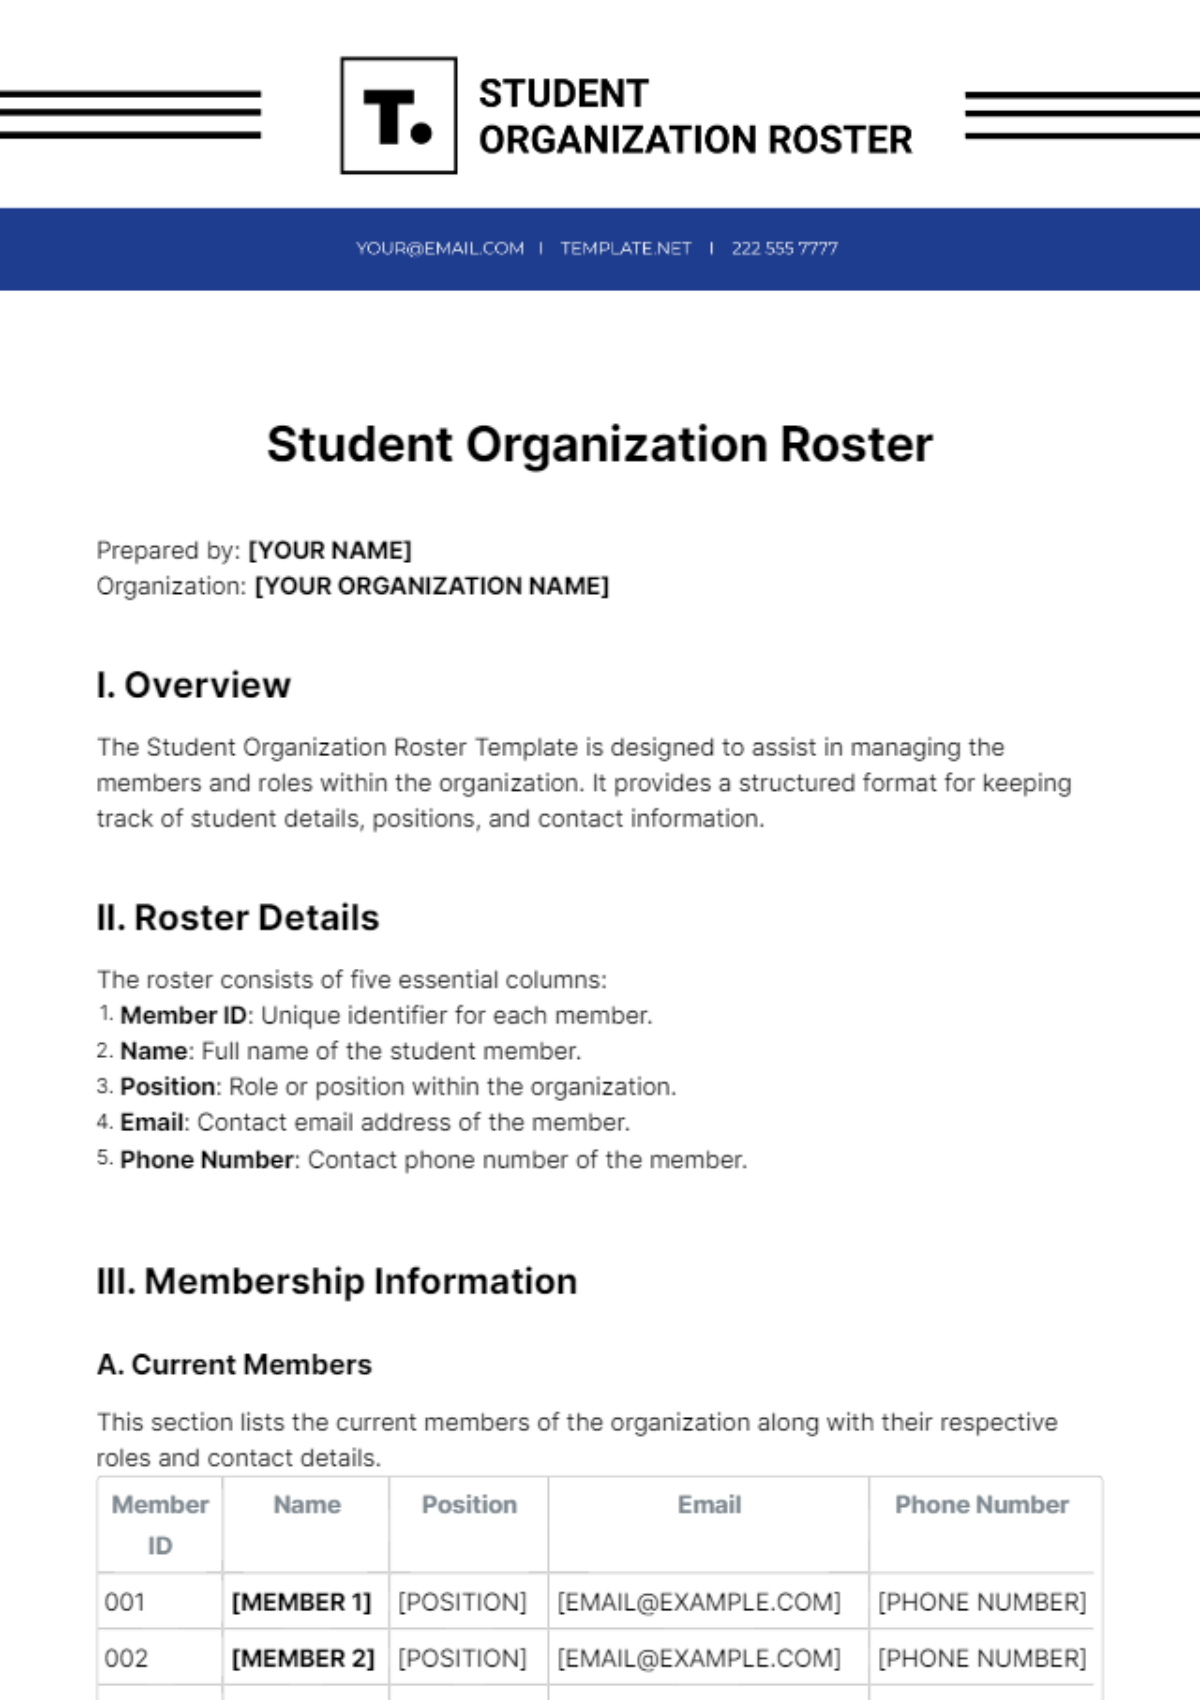 Student Organization Roster Template